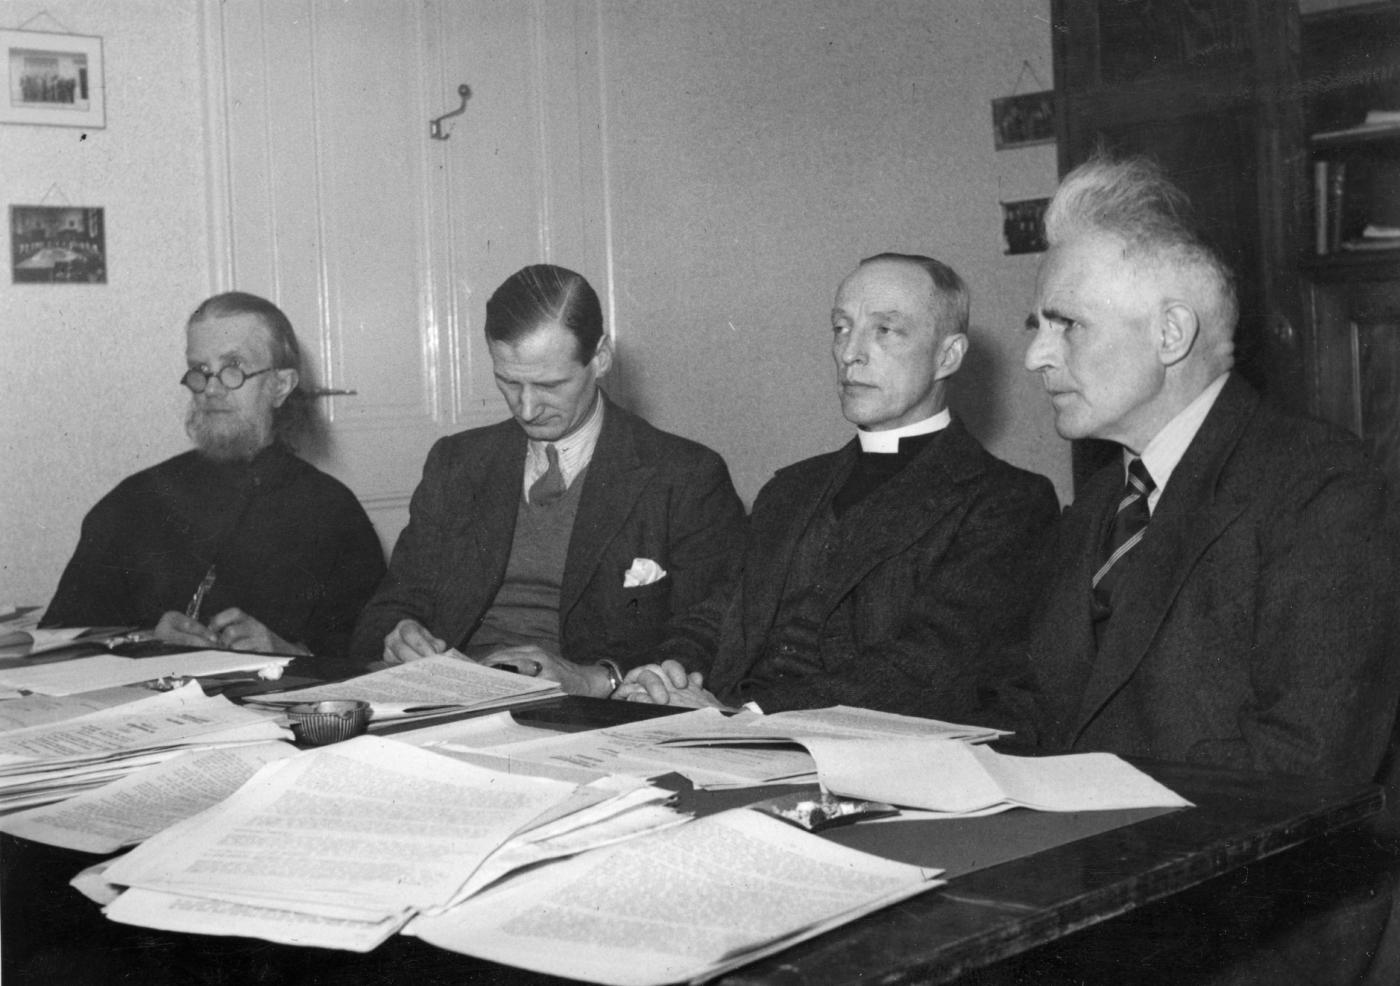 A Commission of the Study Department preparing for the WCC Assembly in Amsterdam, 1948: Georges Florovsky, Oliver Tomkins, Floyd Tomkins and Emil Brunner. Photo: WCC Archive